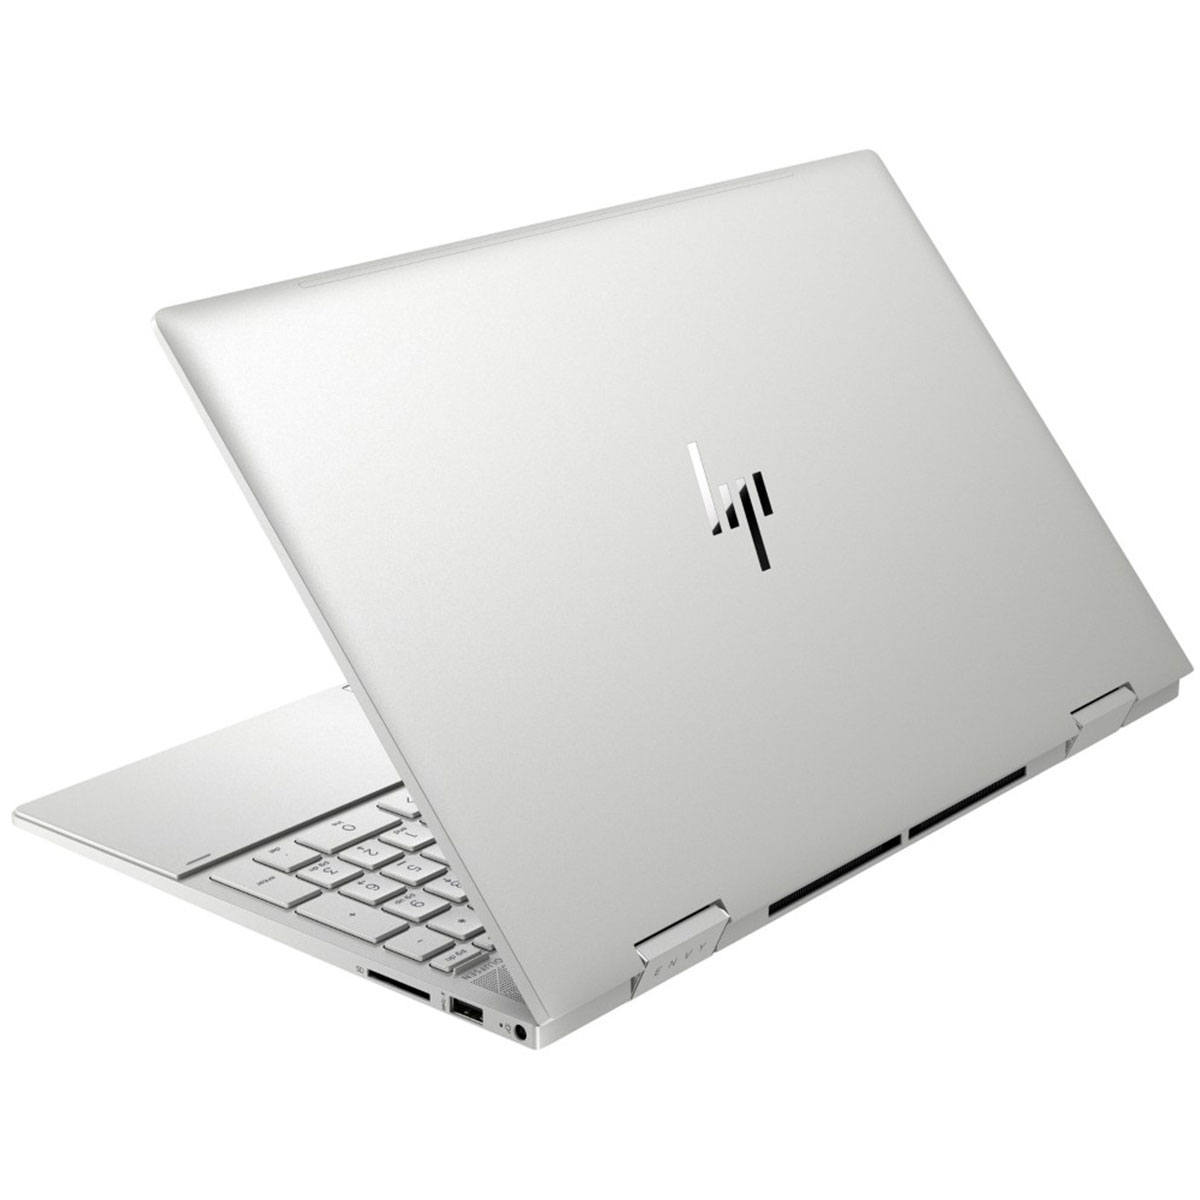 Hp Envy 15t-ed100 X360 Intel Core i7 11th Gen 8GB RAM 512GB SSD + 2GB Graphics 15.6 Inches FHD Touchscreen Display